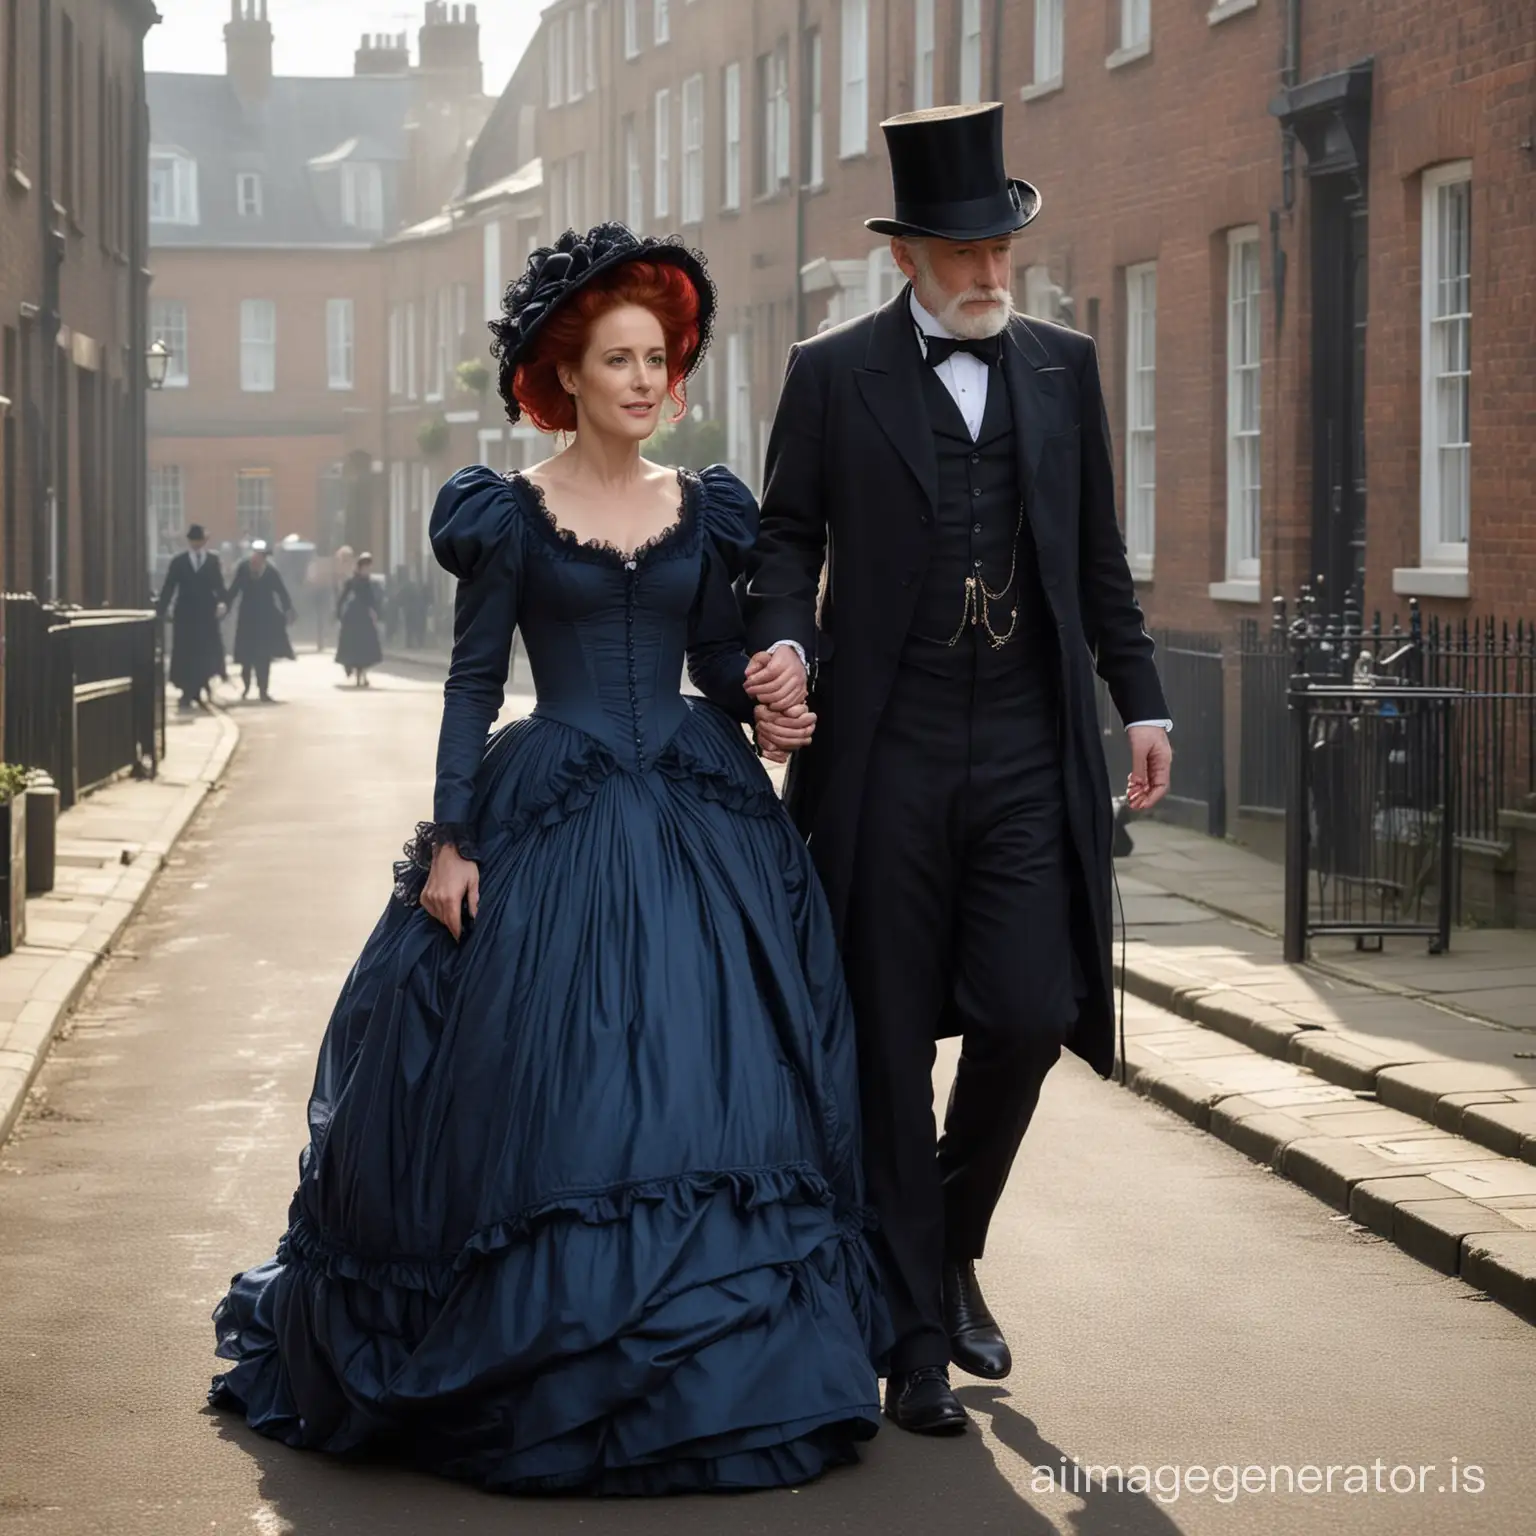 red hair Gillian Anderson wearing a dark blue floor-length loose billowing 1860 Victorian crinoline poofy dress with a frilly bonnet walking on Victorian era street with an old man dressed into a black Victorian suit who seems to be her newlywed husband